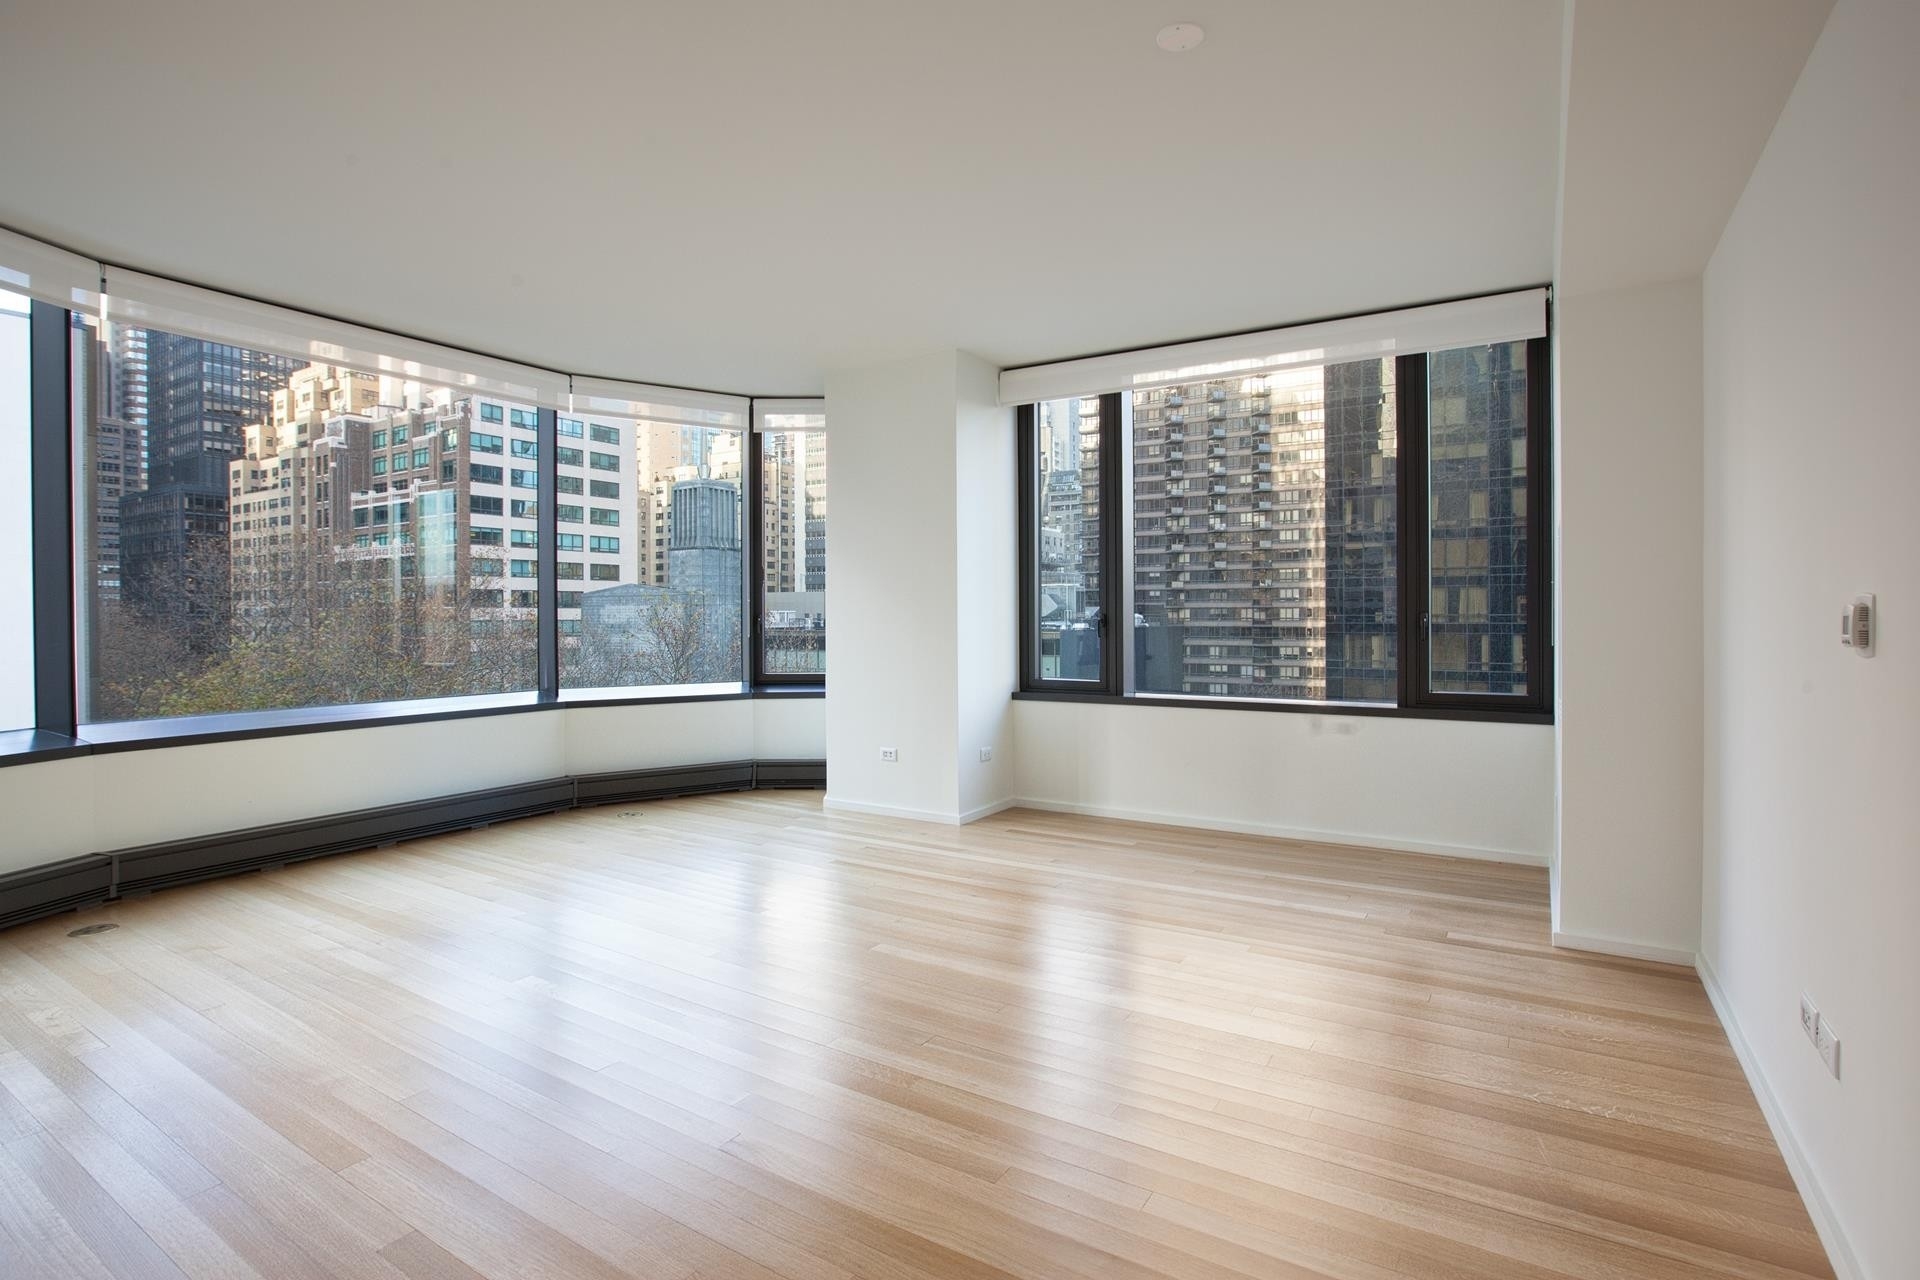 Condominium for Sale at 50 UNITED NATIONS PLZ, 6C Turtle Bay, New York, NY 10017